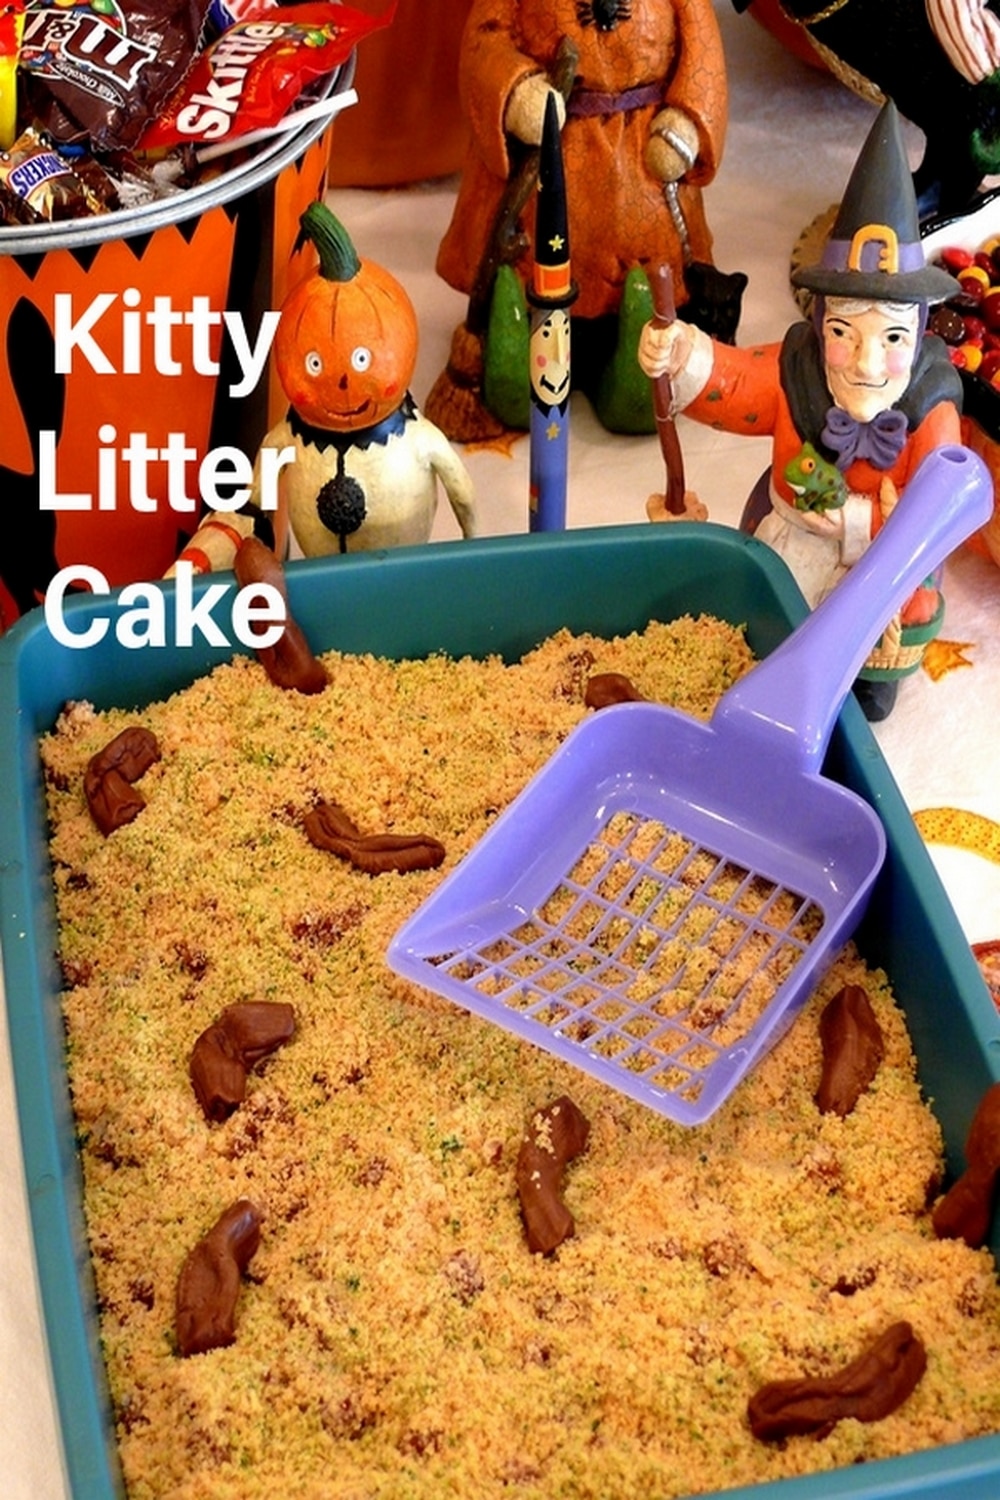 The Kitty Litter Cake is the ultimate Halloween gross-out dessert. It's absolutely delicious, but it's guaranteed to spook anyone who lays eyes on it. Don't even think about hosting your party without this eerie treat! via @cmpollak1